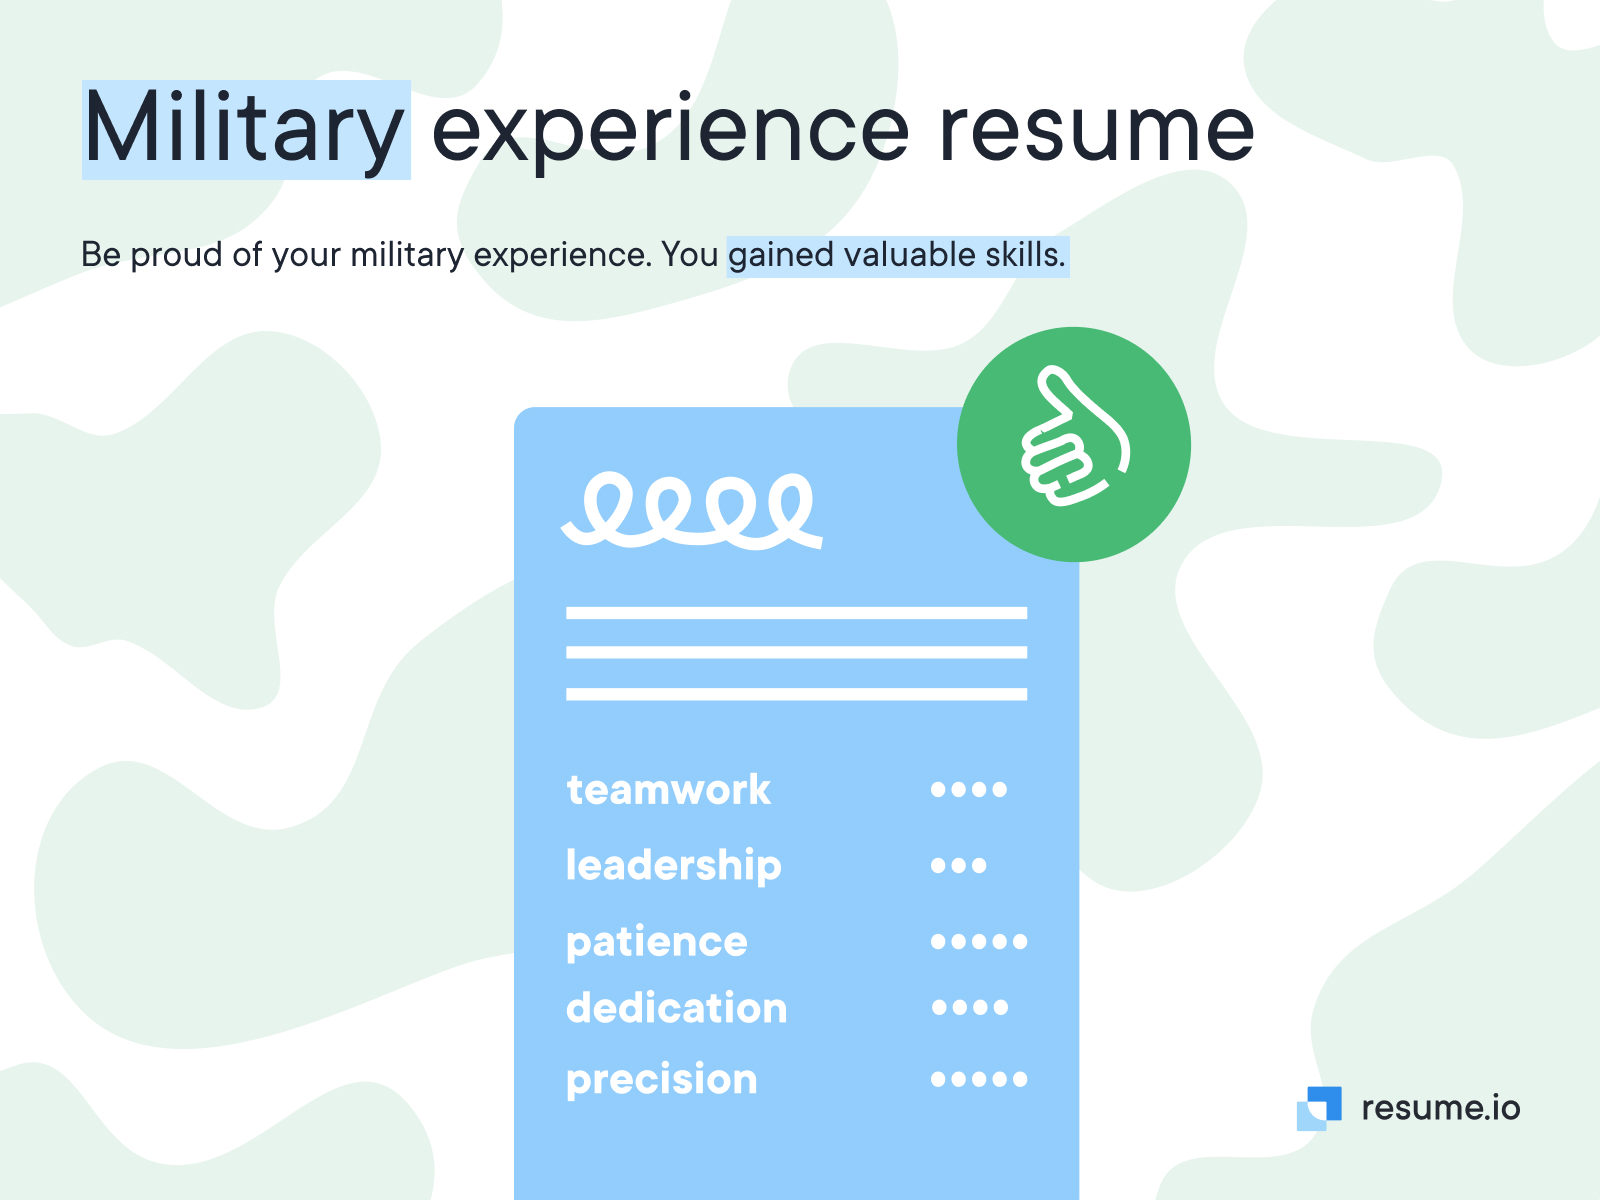 Military experience resume